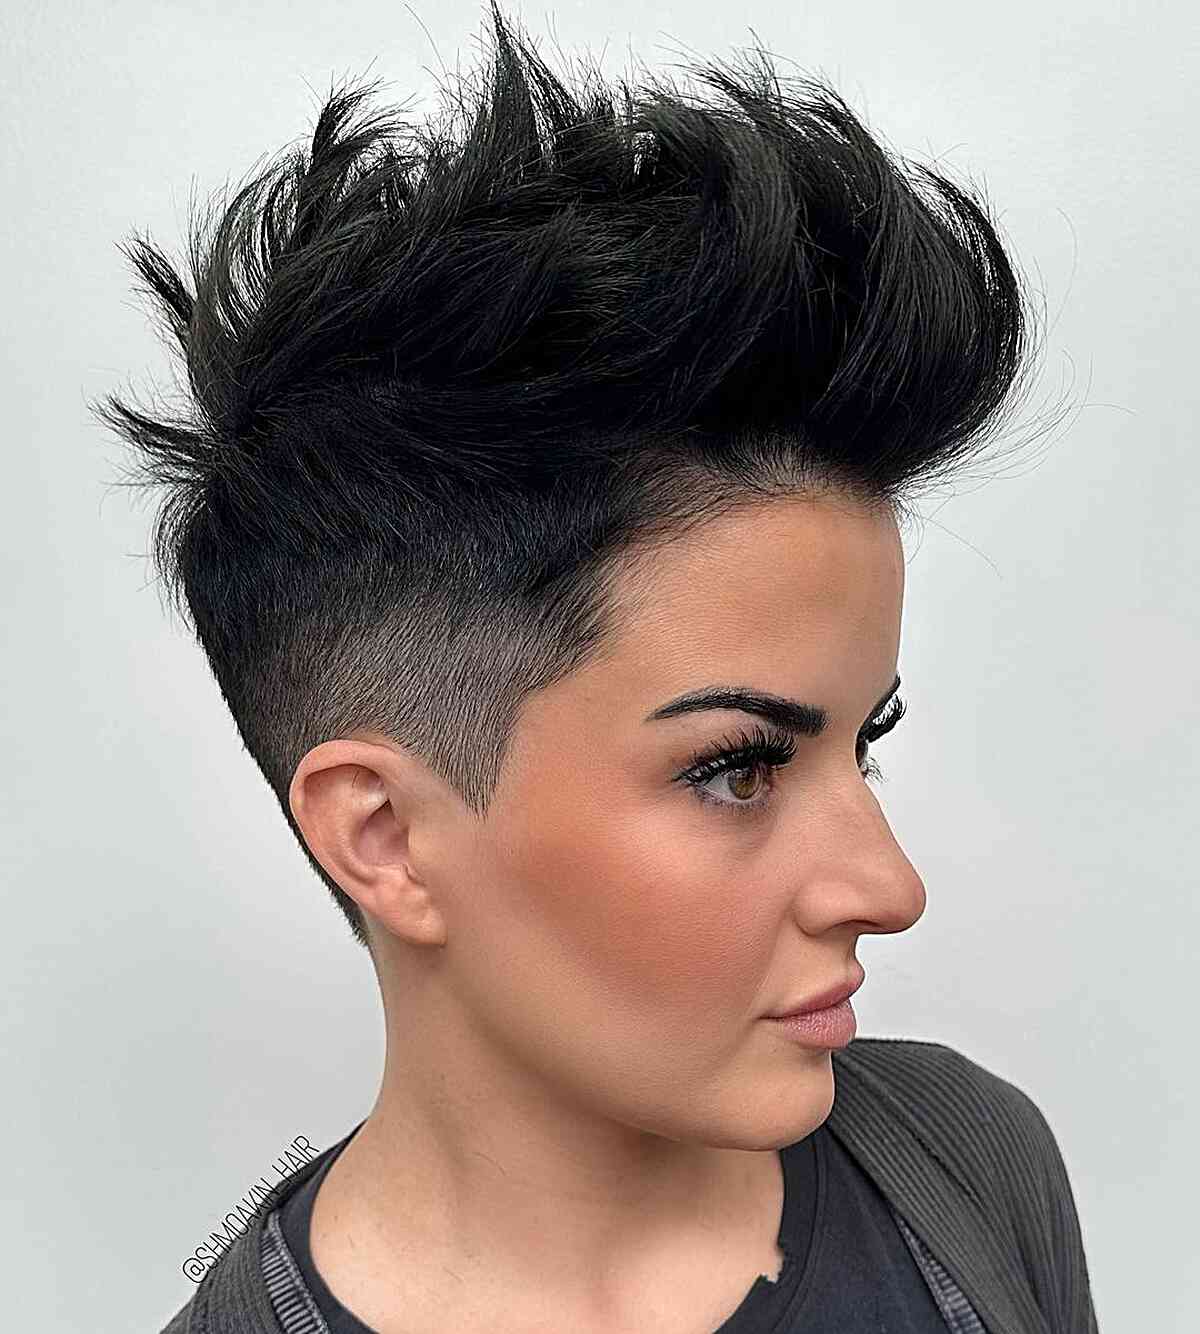 Spiky Edgy Pixie Cut with a Mid Fade for Women with dark short hair